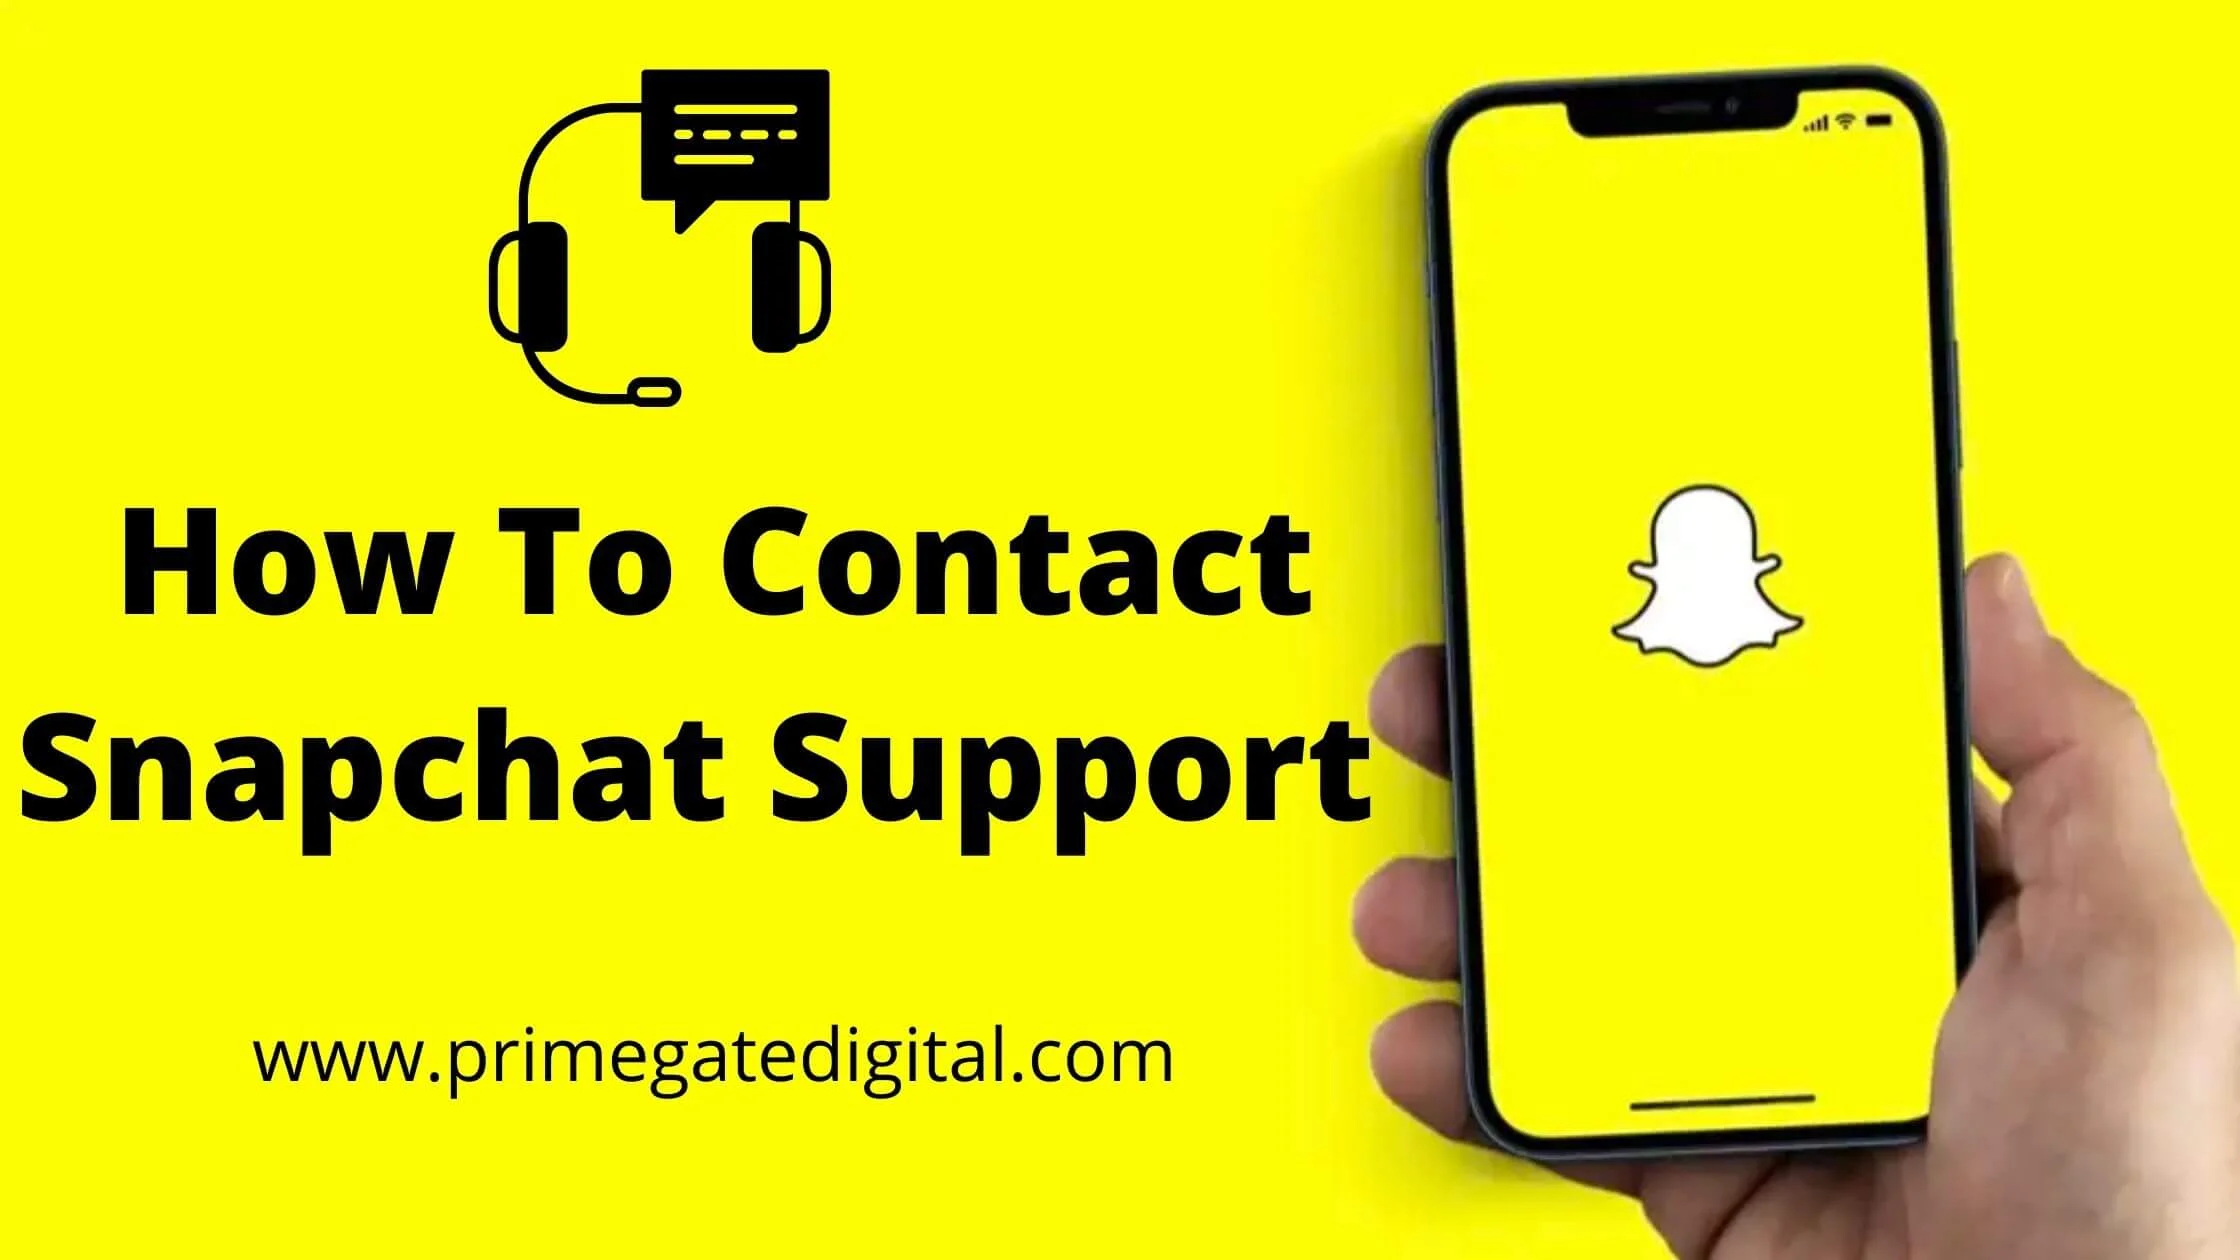 How To Contact Snapchat Support